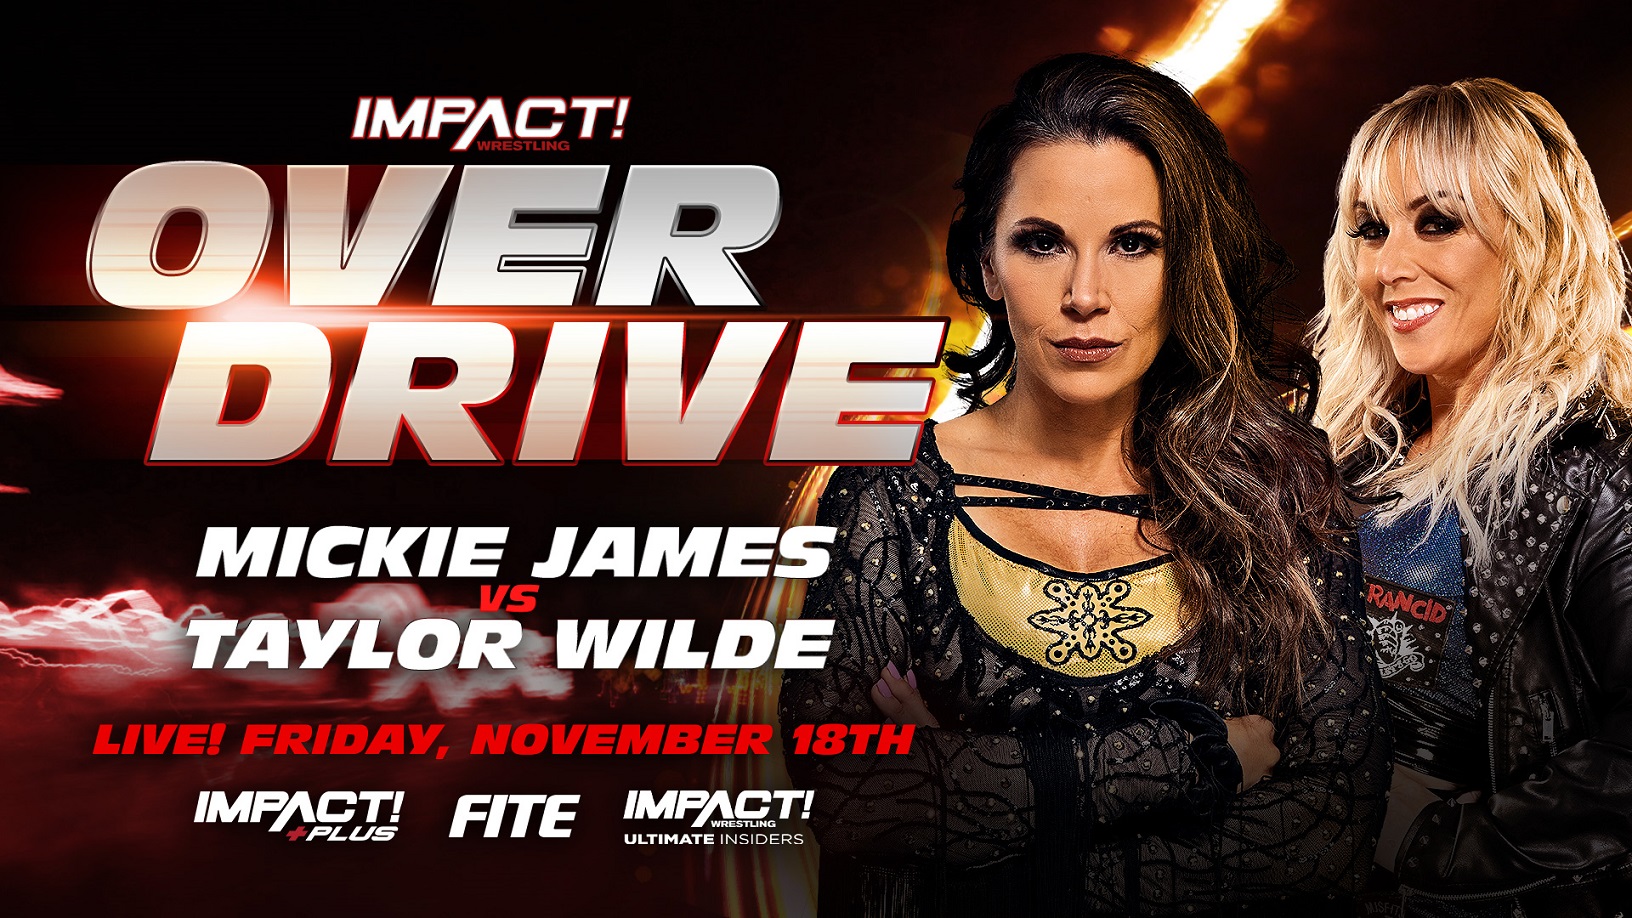 Mickie James’ Last Rodeo Comes to Over Drive With Dream Match vs Taylor Wilde